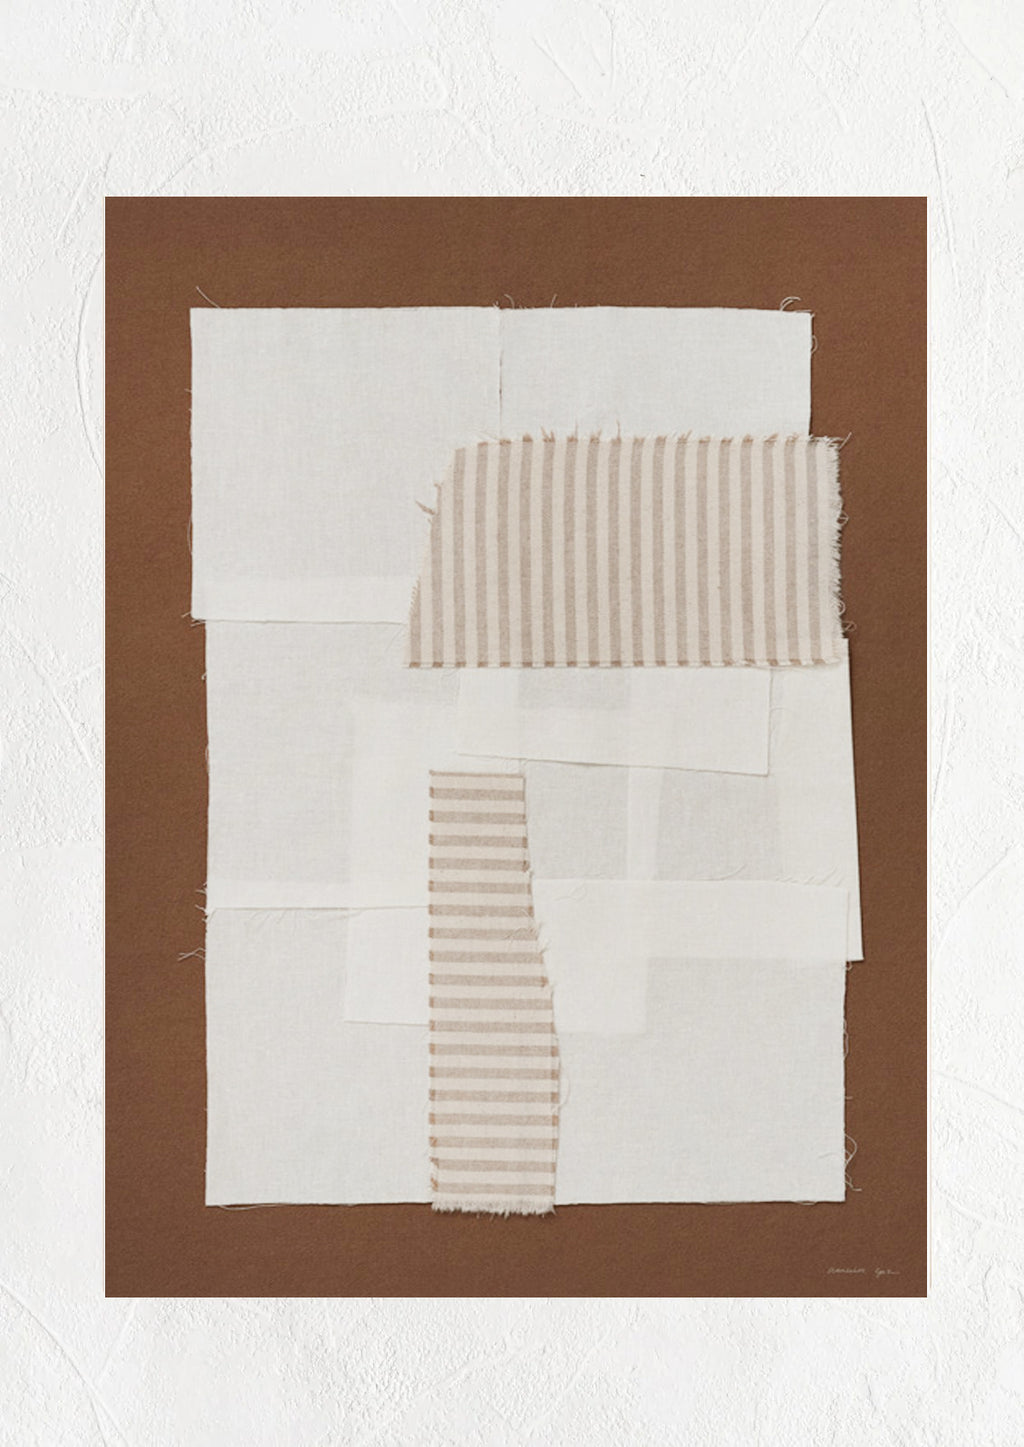 1: A brown art print with photographed textiles in ivory and tan stripes.